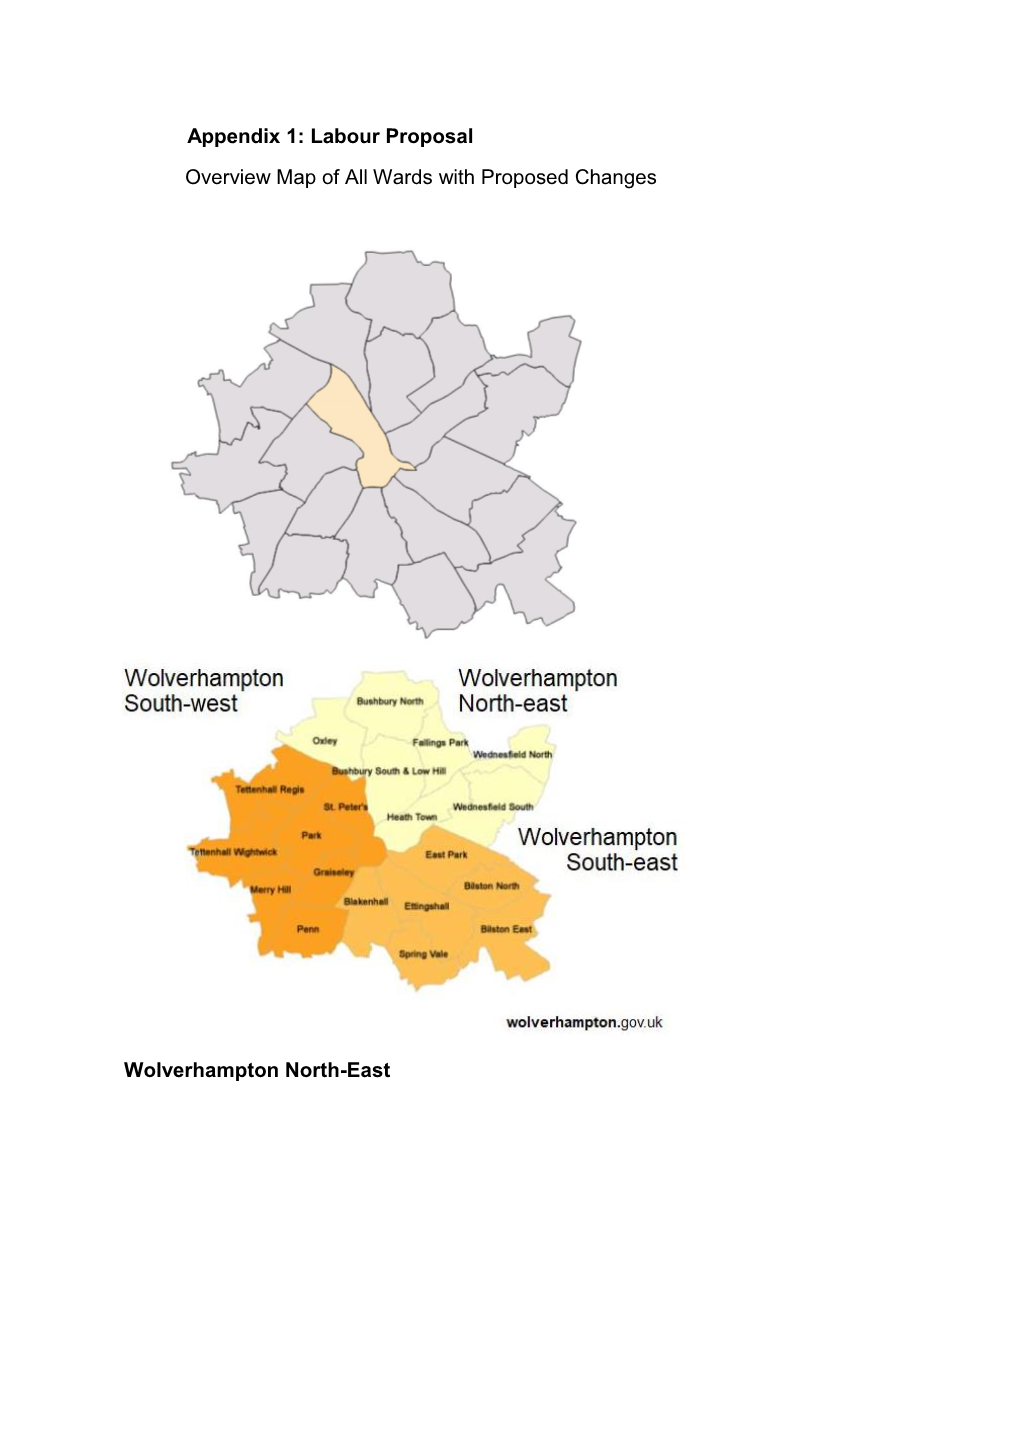 Appendix 1: Labour Proposal Overview Map of All Wards with Proposed Changes